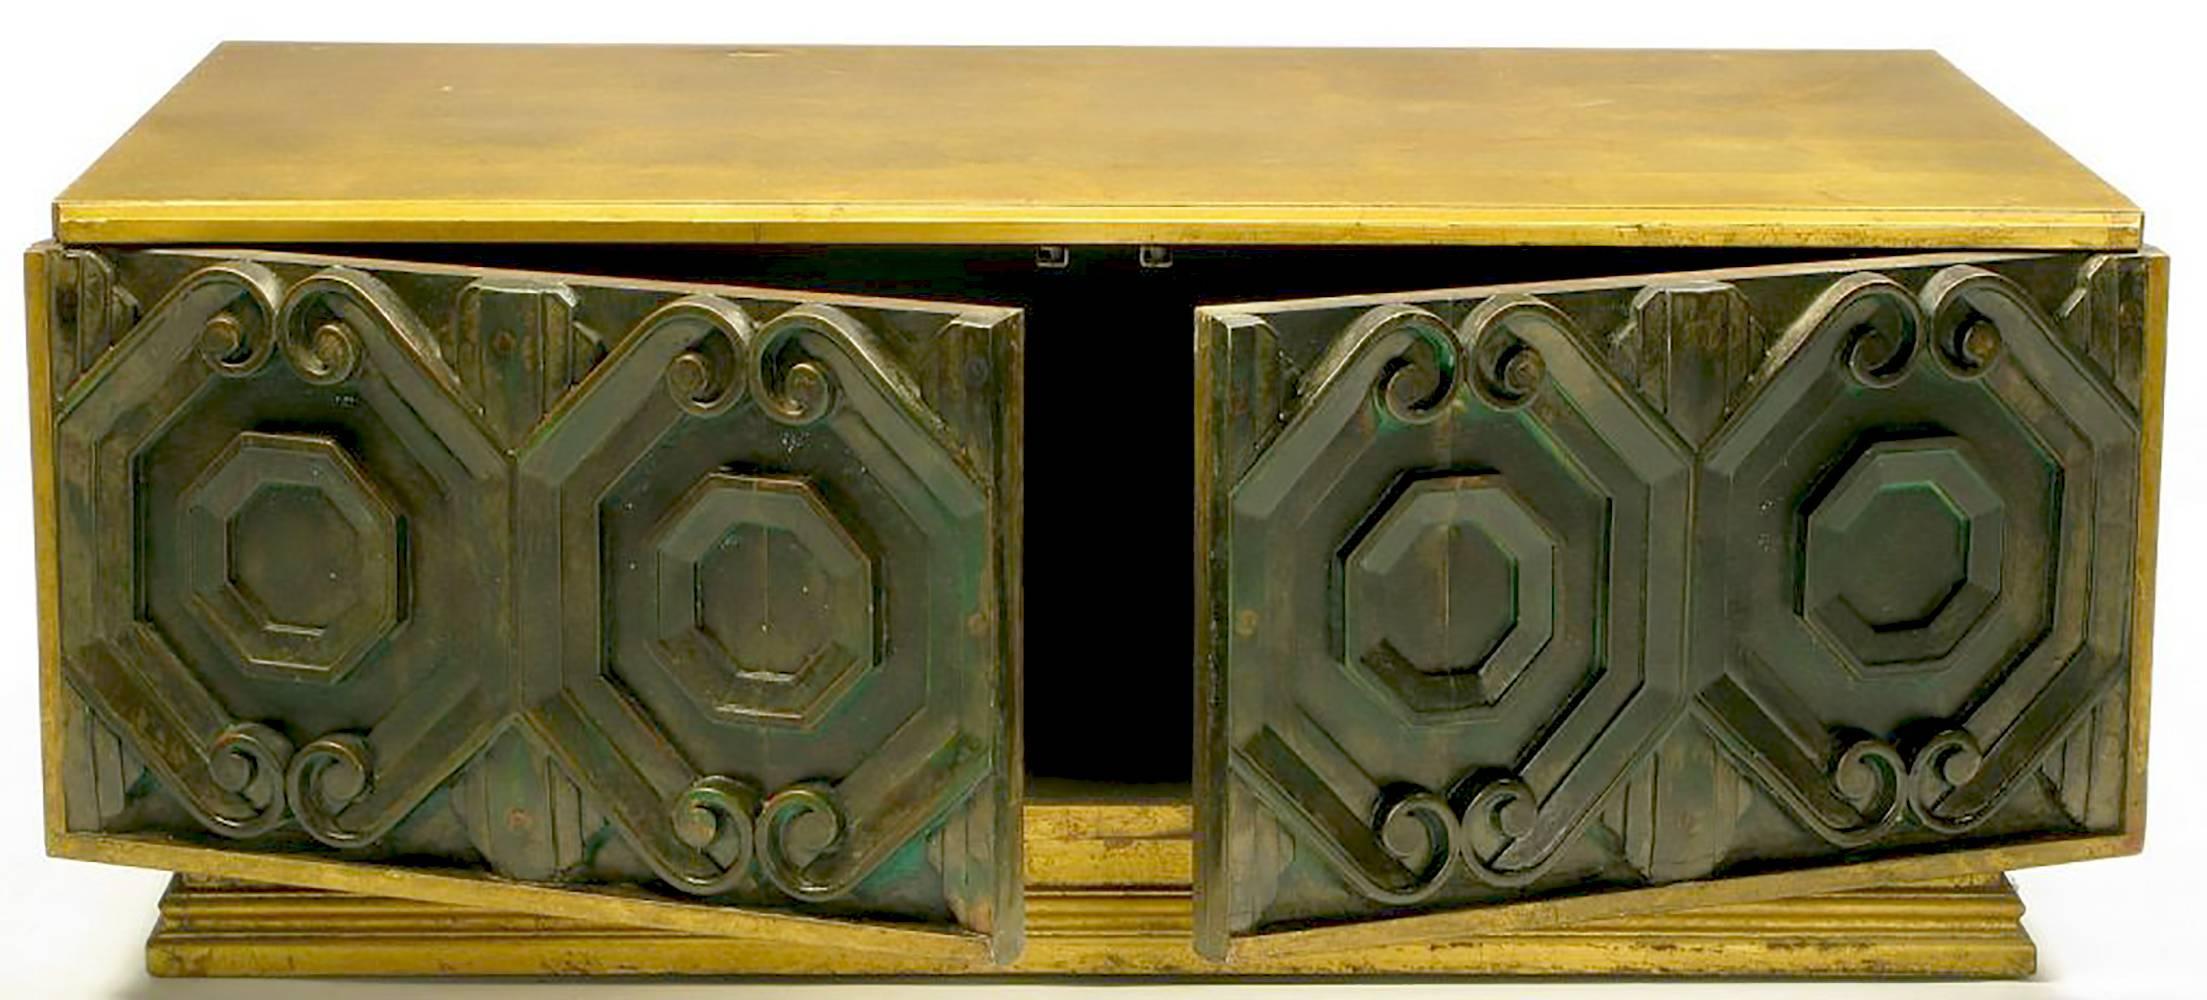 This unusual and rare two-door low cabinet by Phyllis Morris can be used as a coffee table, or as an oversized end table. The unique designs and detailing of products from Phyllis Morris's atelier earned the Beverly Hills entrepreneur the sobriquet